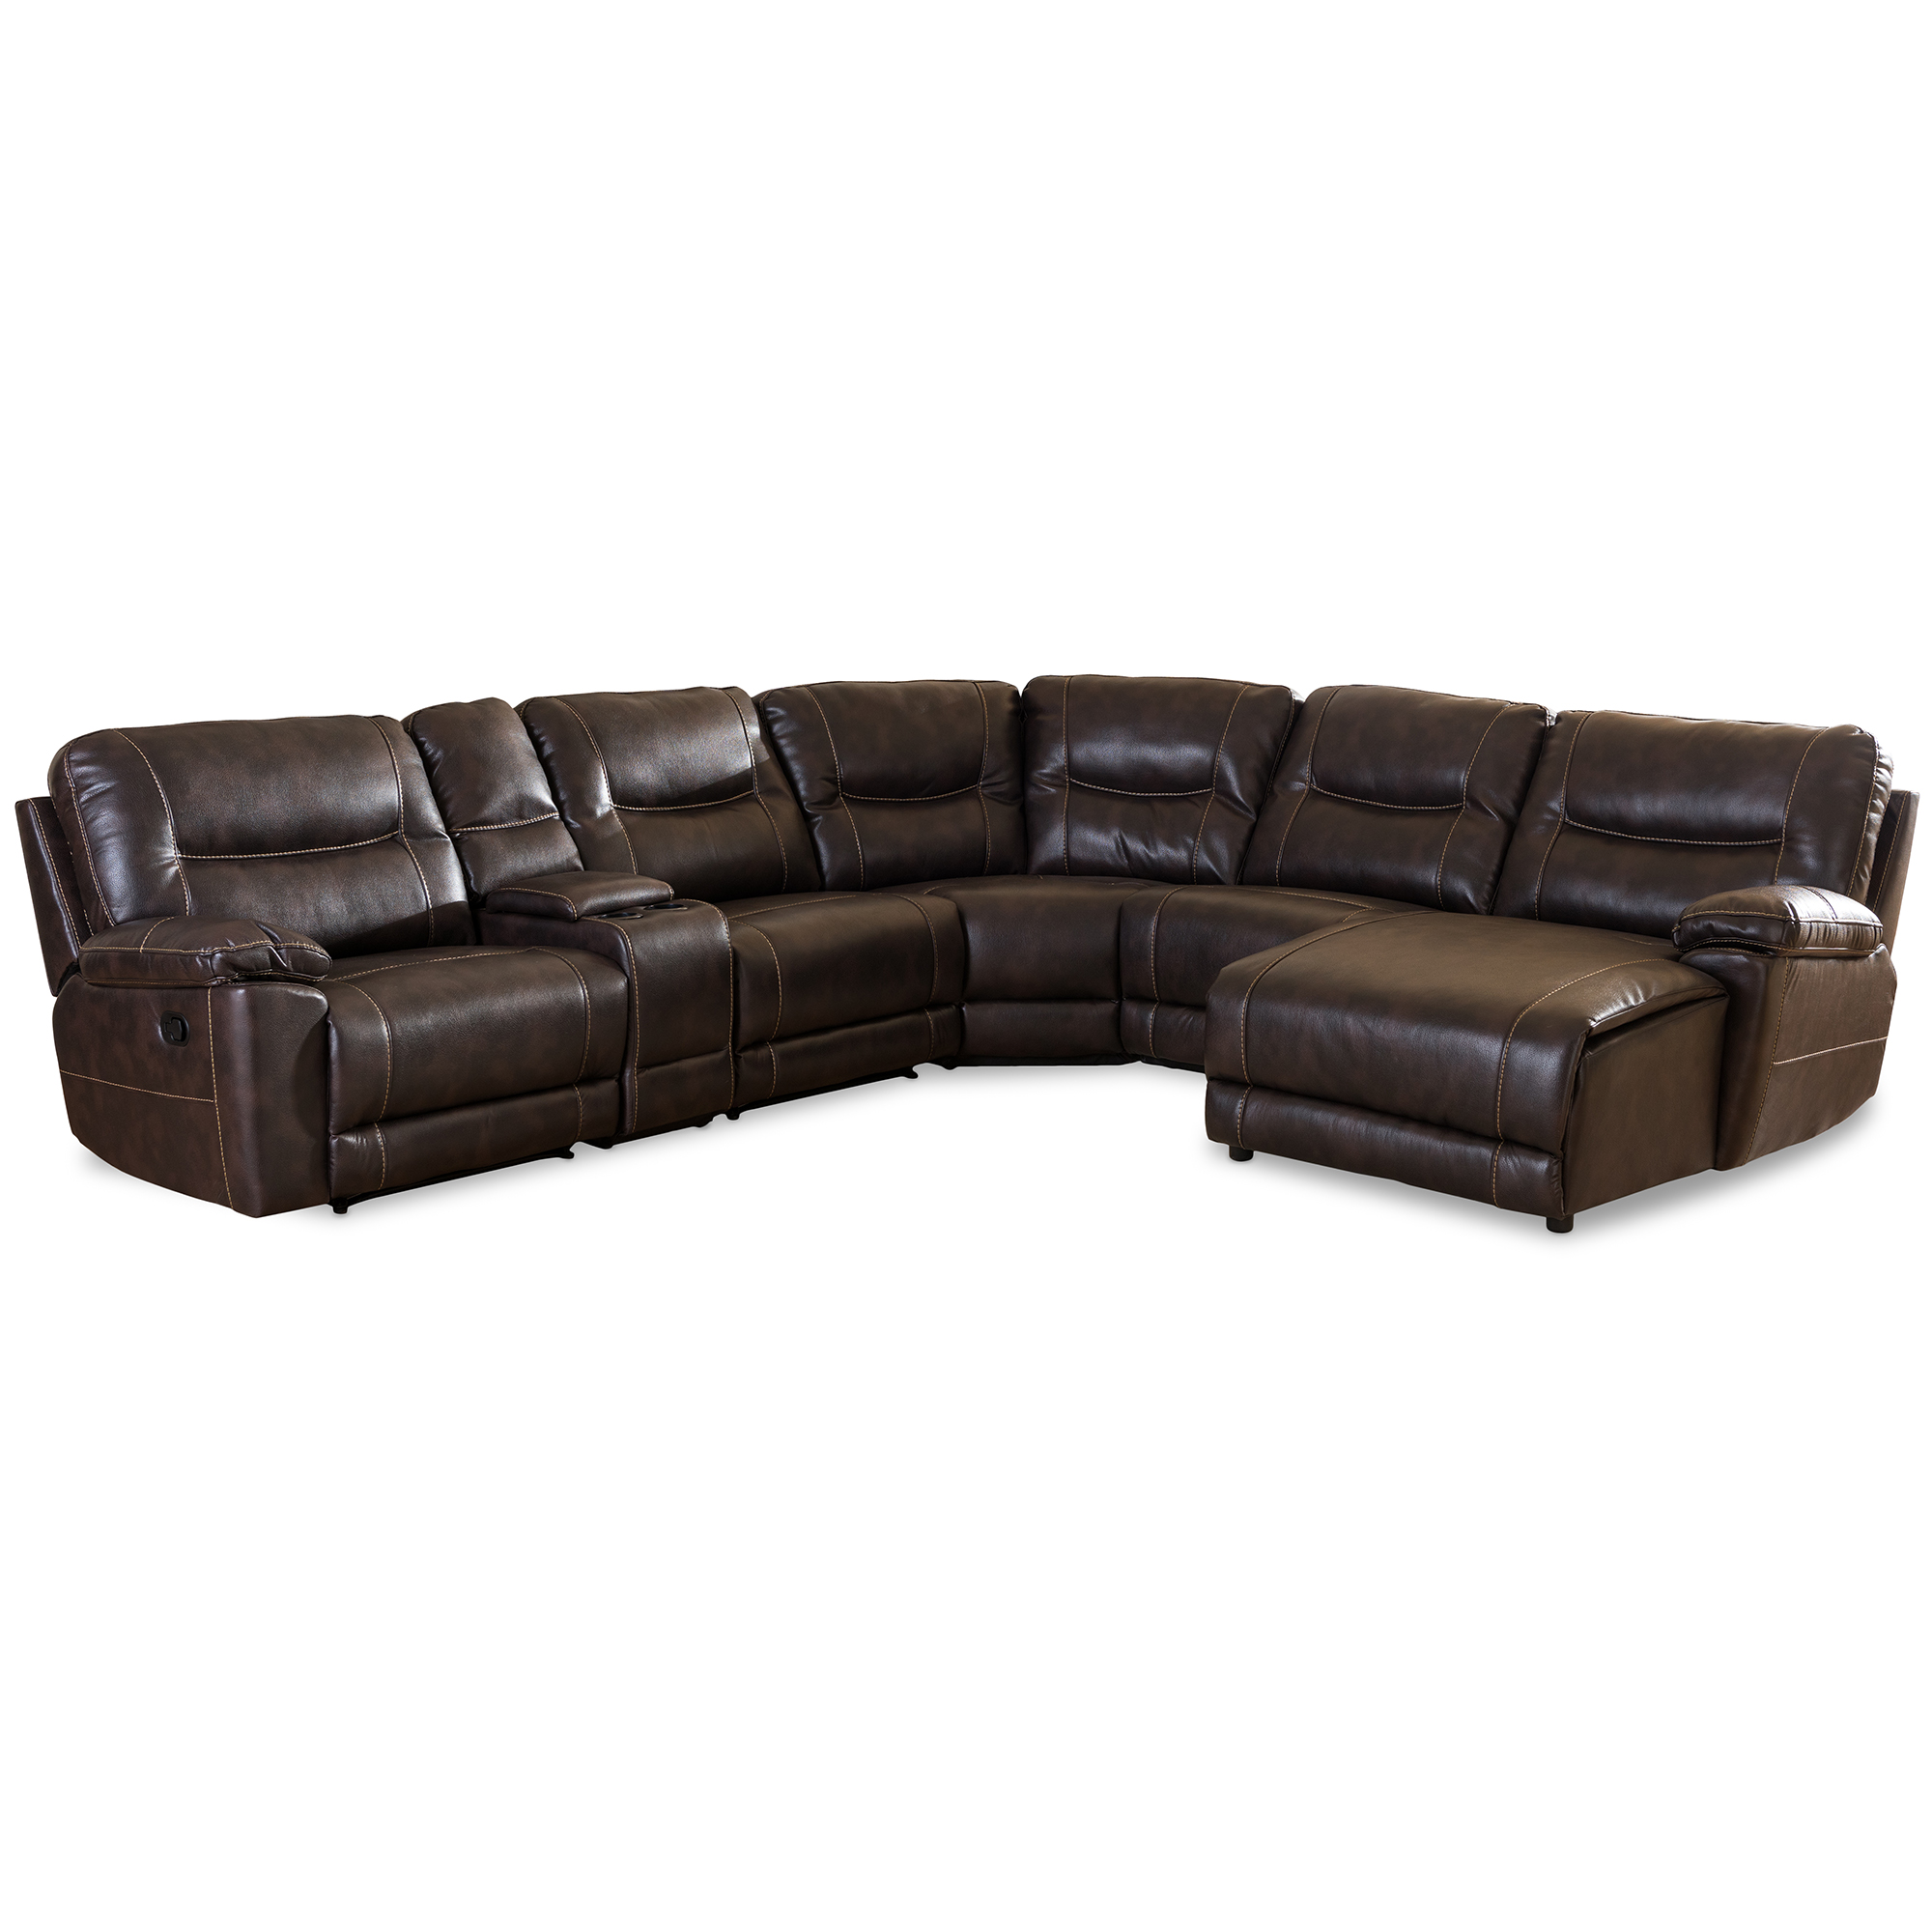 Baxton Studio Mistral Modern and Contemporary Dark Brown Bonded Leather 6-Piece Sectional with Recliners Corner Lounge Suite